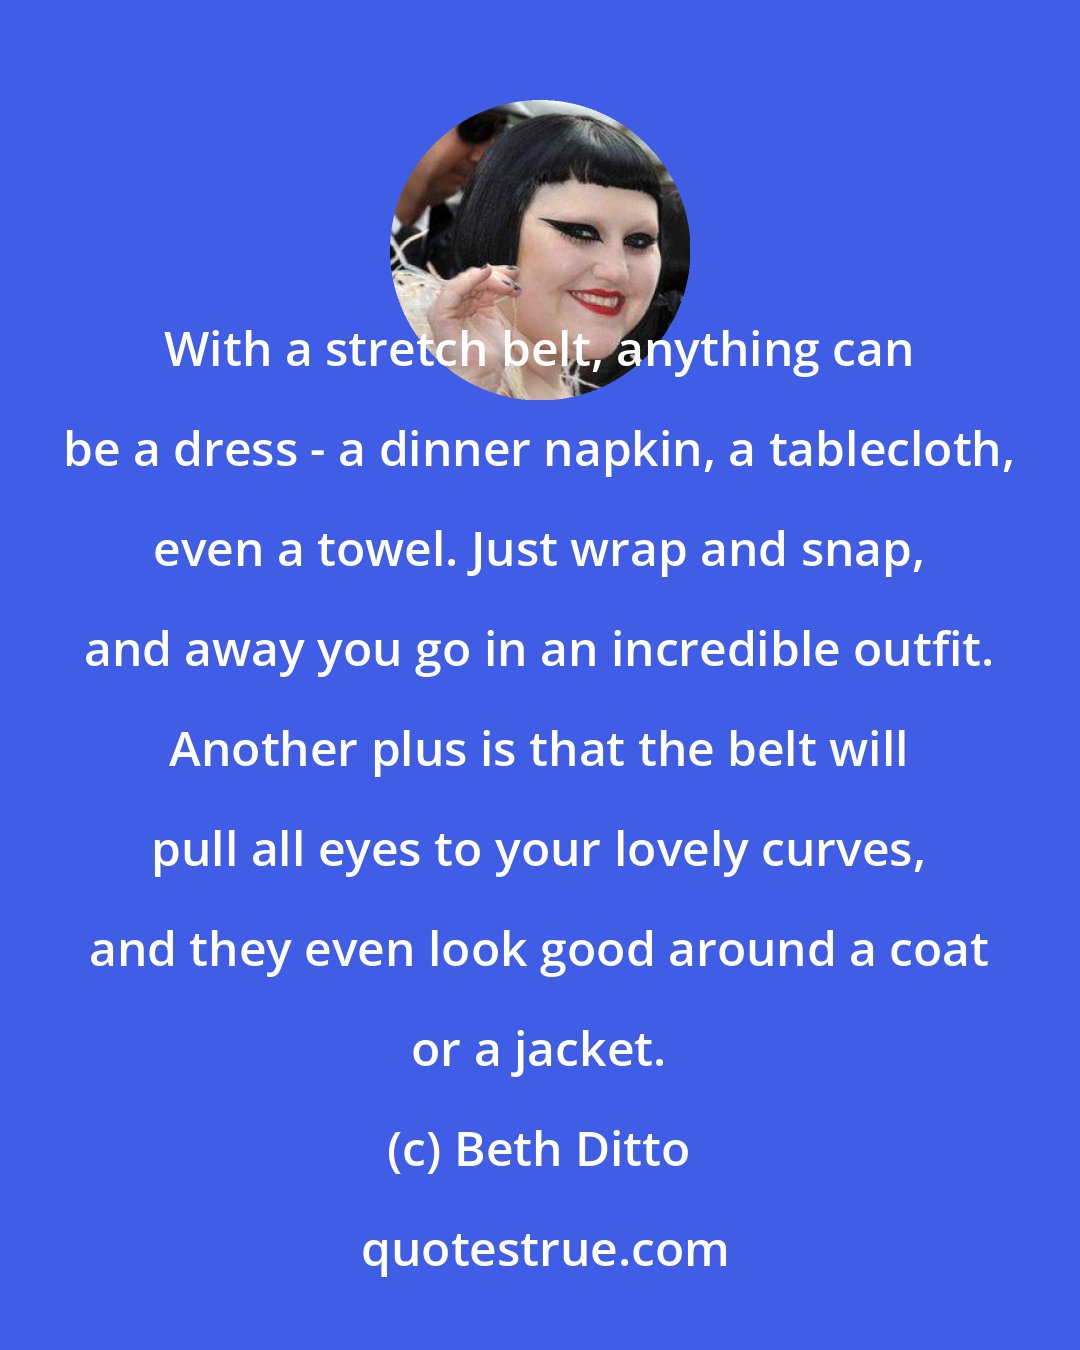 Beth Ditto: With a stretch belt, anything can be a dress - a dinner napkin, a tablecloth, even a towel. Just wrap and snap, and away you go in an incredible outfit. Another plus is that the belt will pull all eyes to your lovely curves, and they even look good around a coat or a jacket.